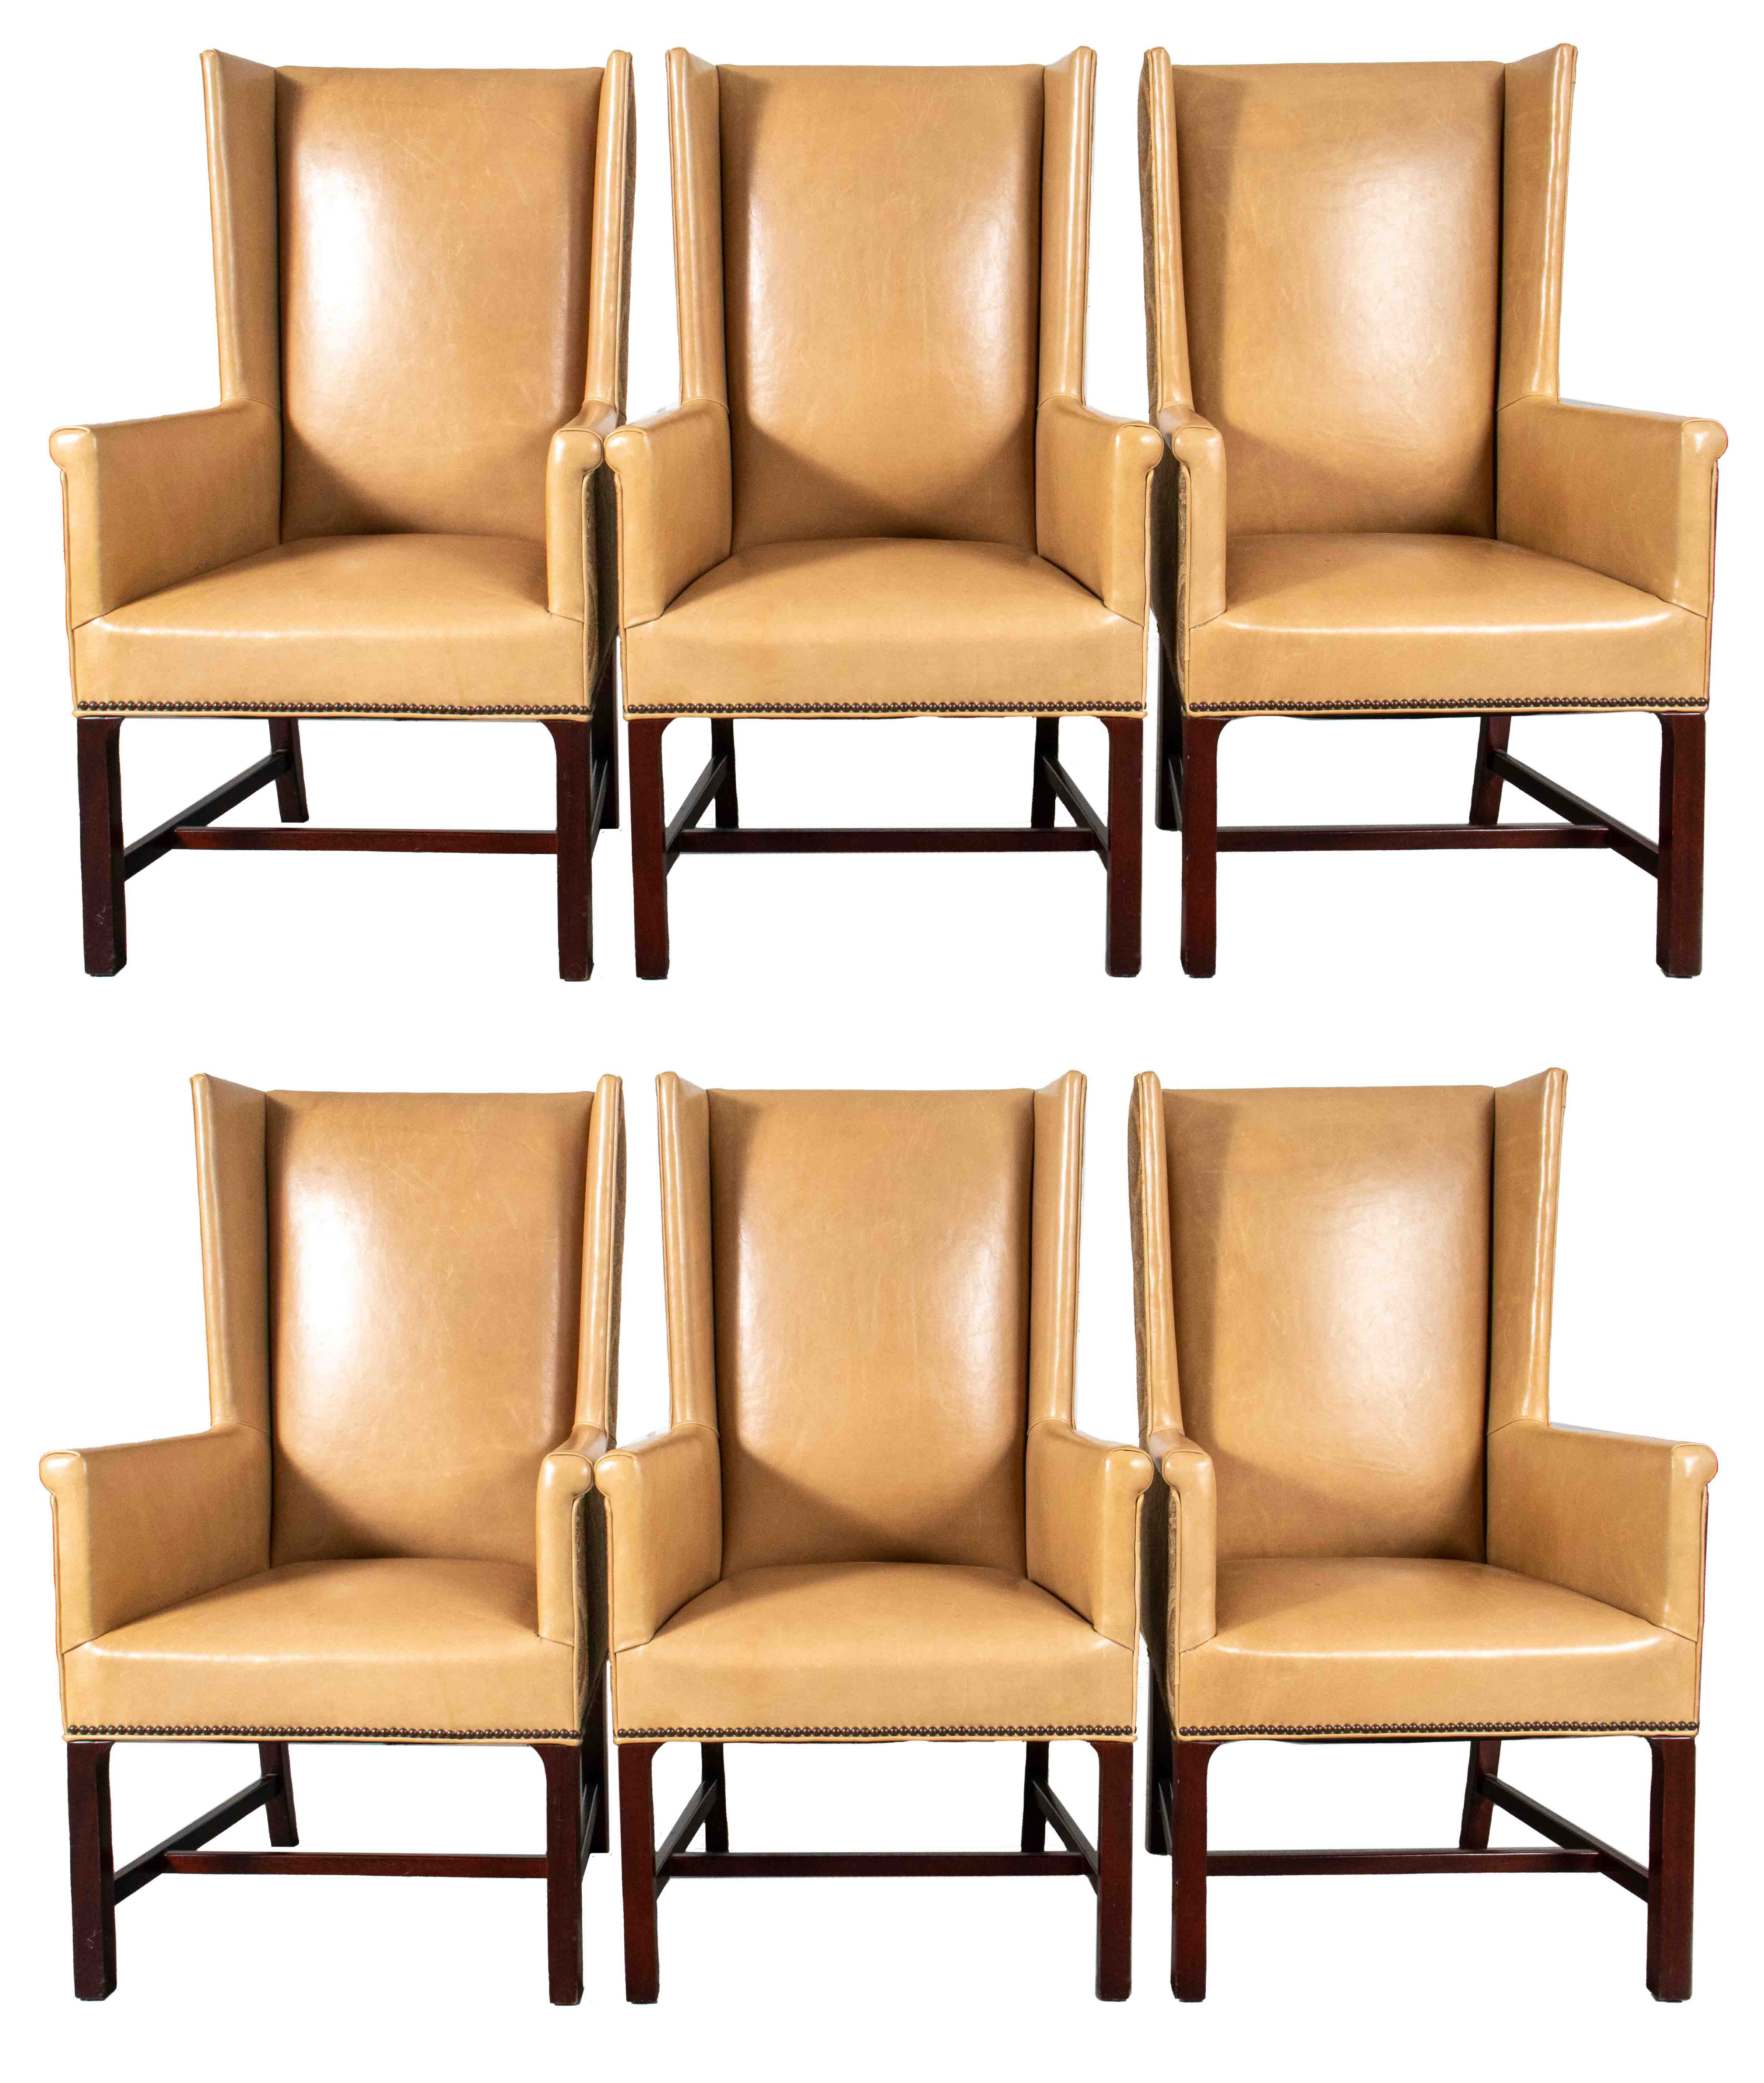 MODERN WINGBACK LEATHER ARMCHAIRS, 6